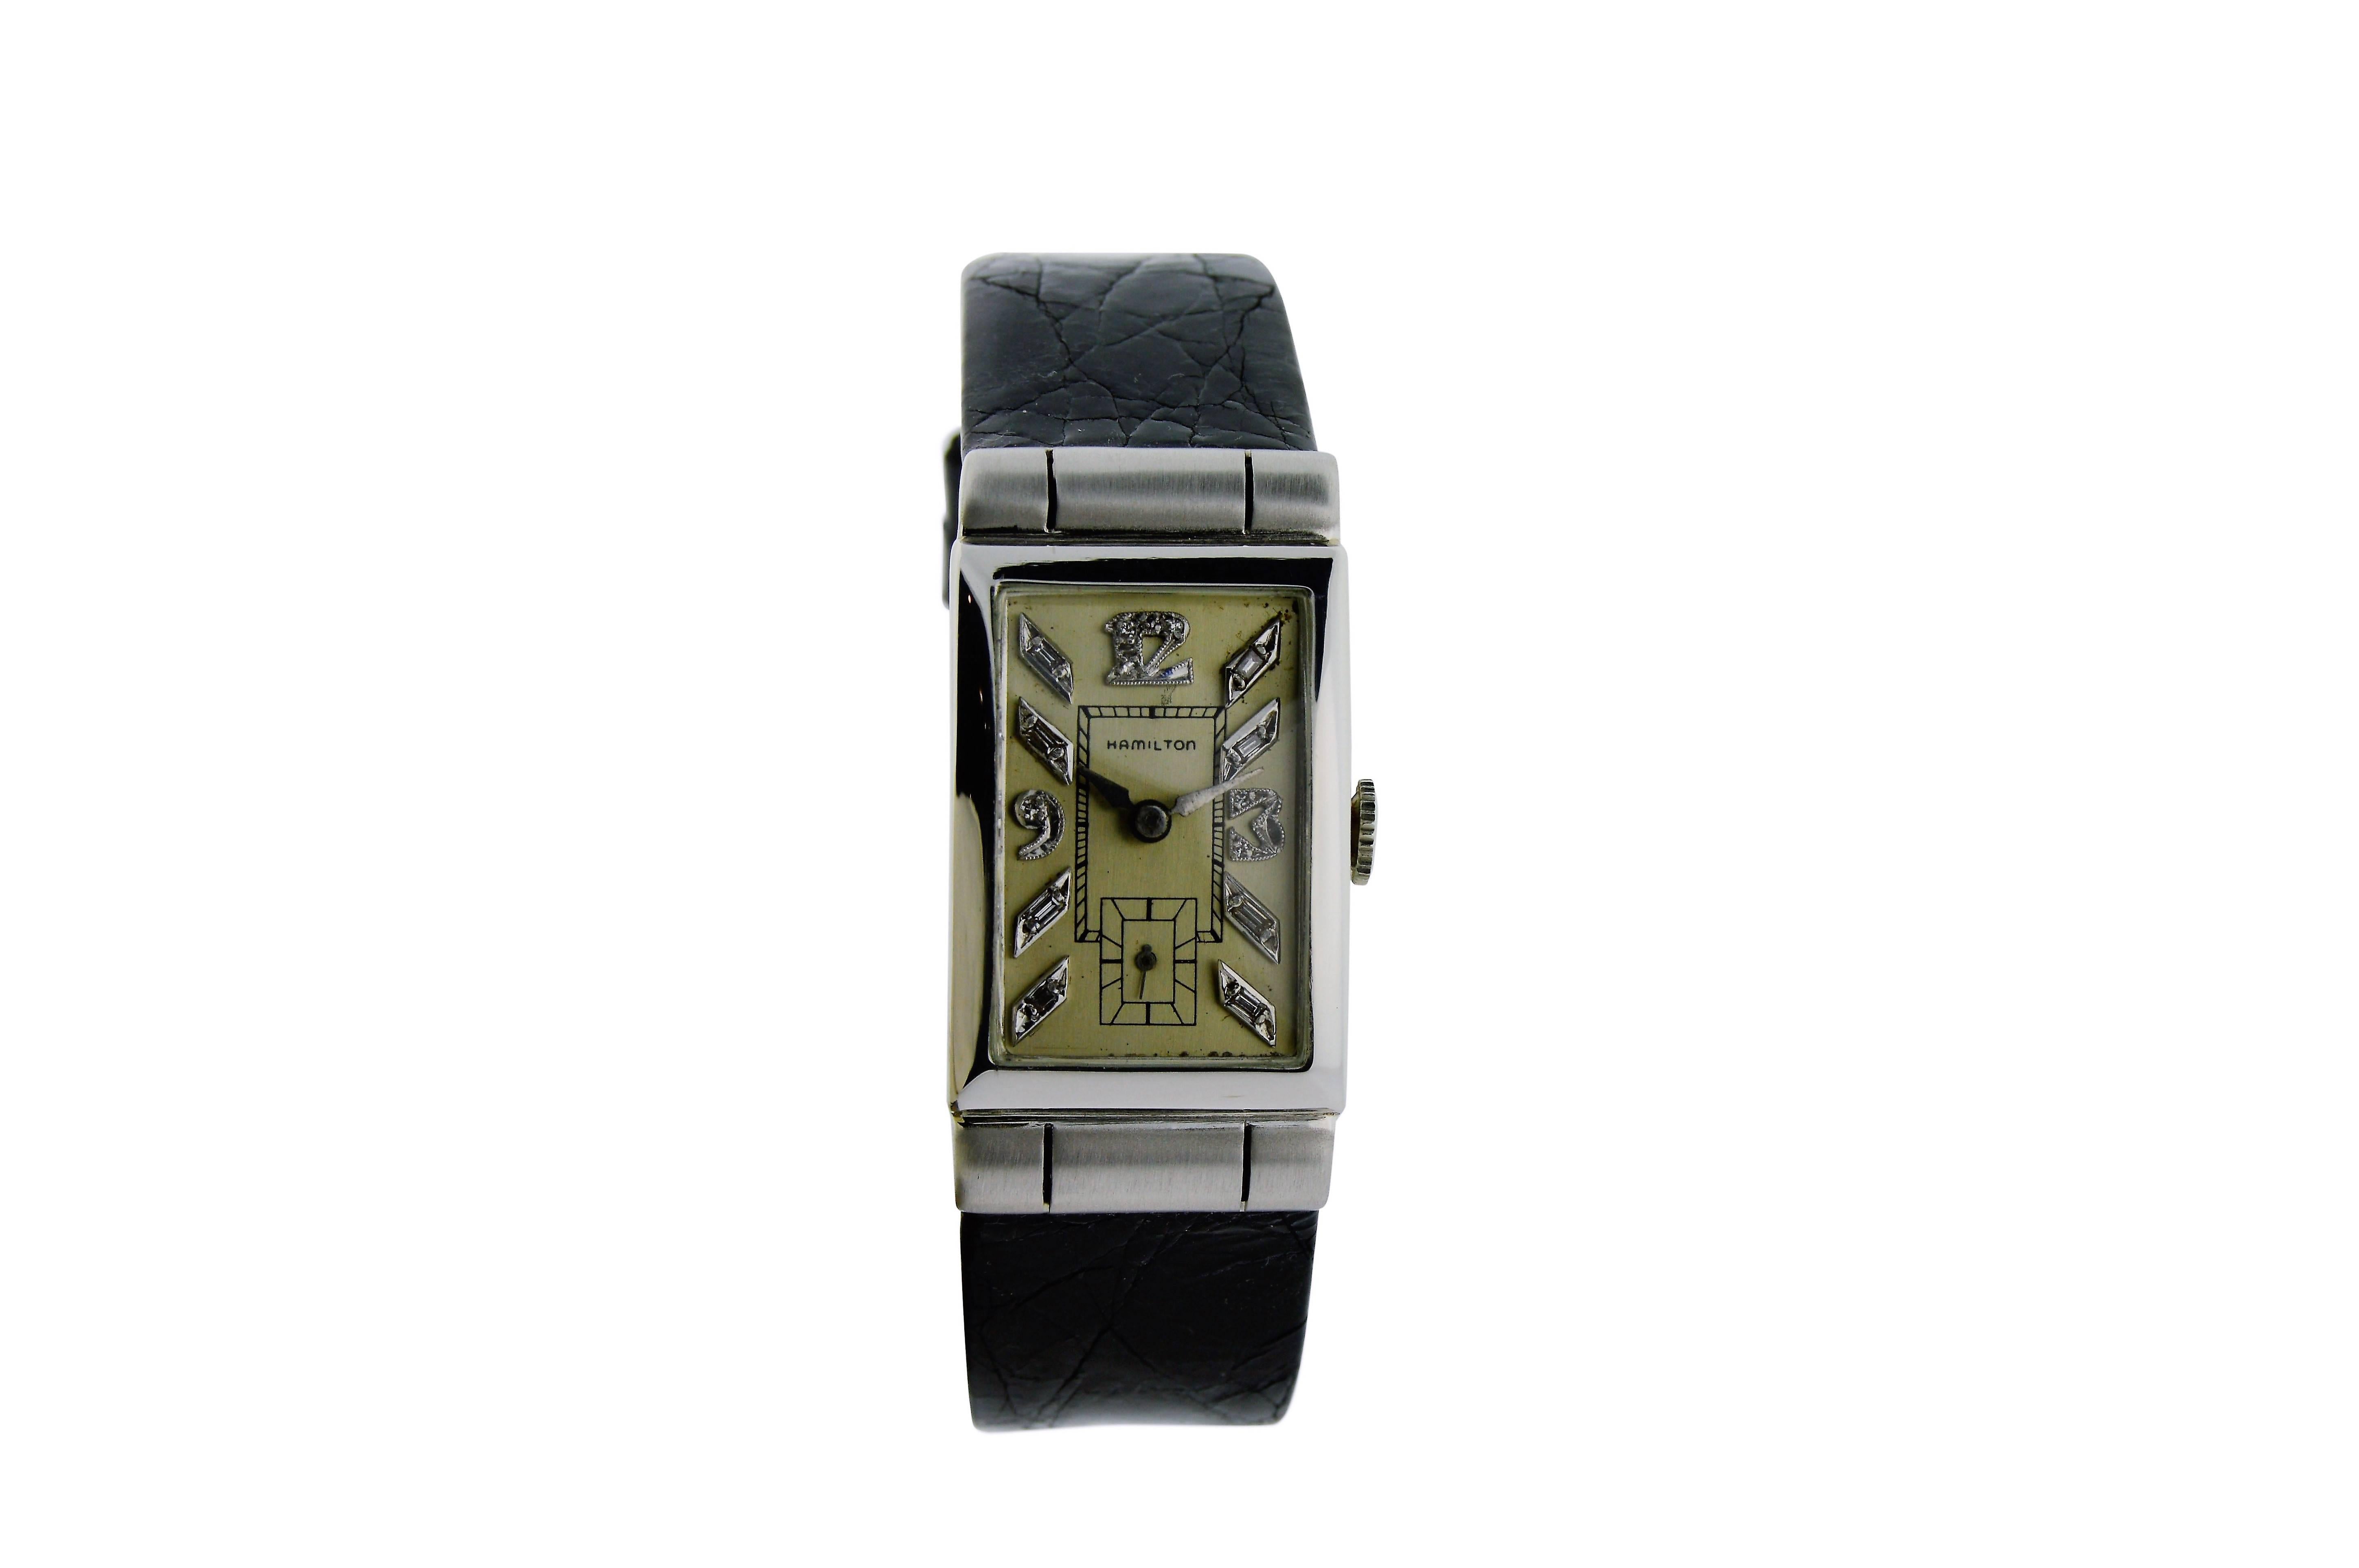 FACTORY / HOUSE: Hamilton Watch Company
STYLE / REFERENCE: Art Deco / Tank Style
METAL / MATERIAL: Platinum
DIMENSIONS: 40mm X 21mm
CIRCA: 1940's
MOVEMENT / CALIBER: Manual Winding / 17 Jewels 
DIAL / HANDS: Original Silvered with Handmade Baguette